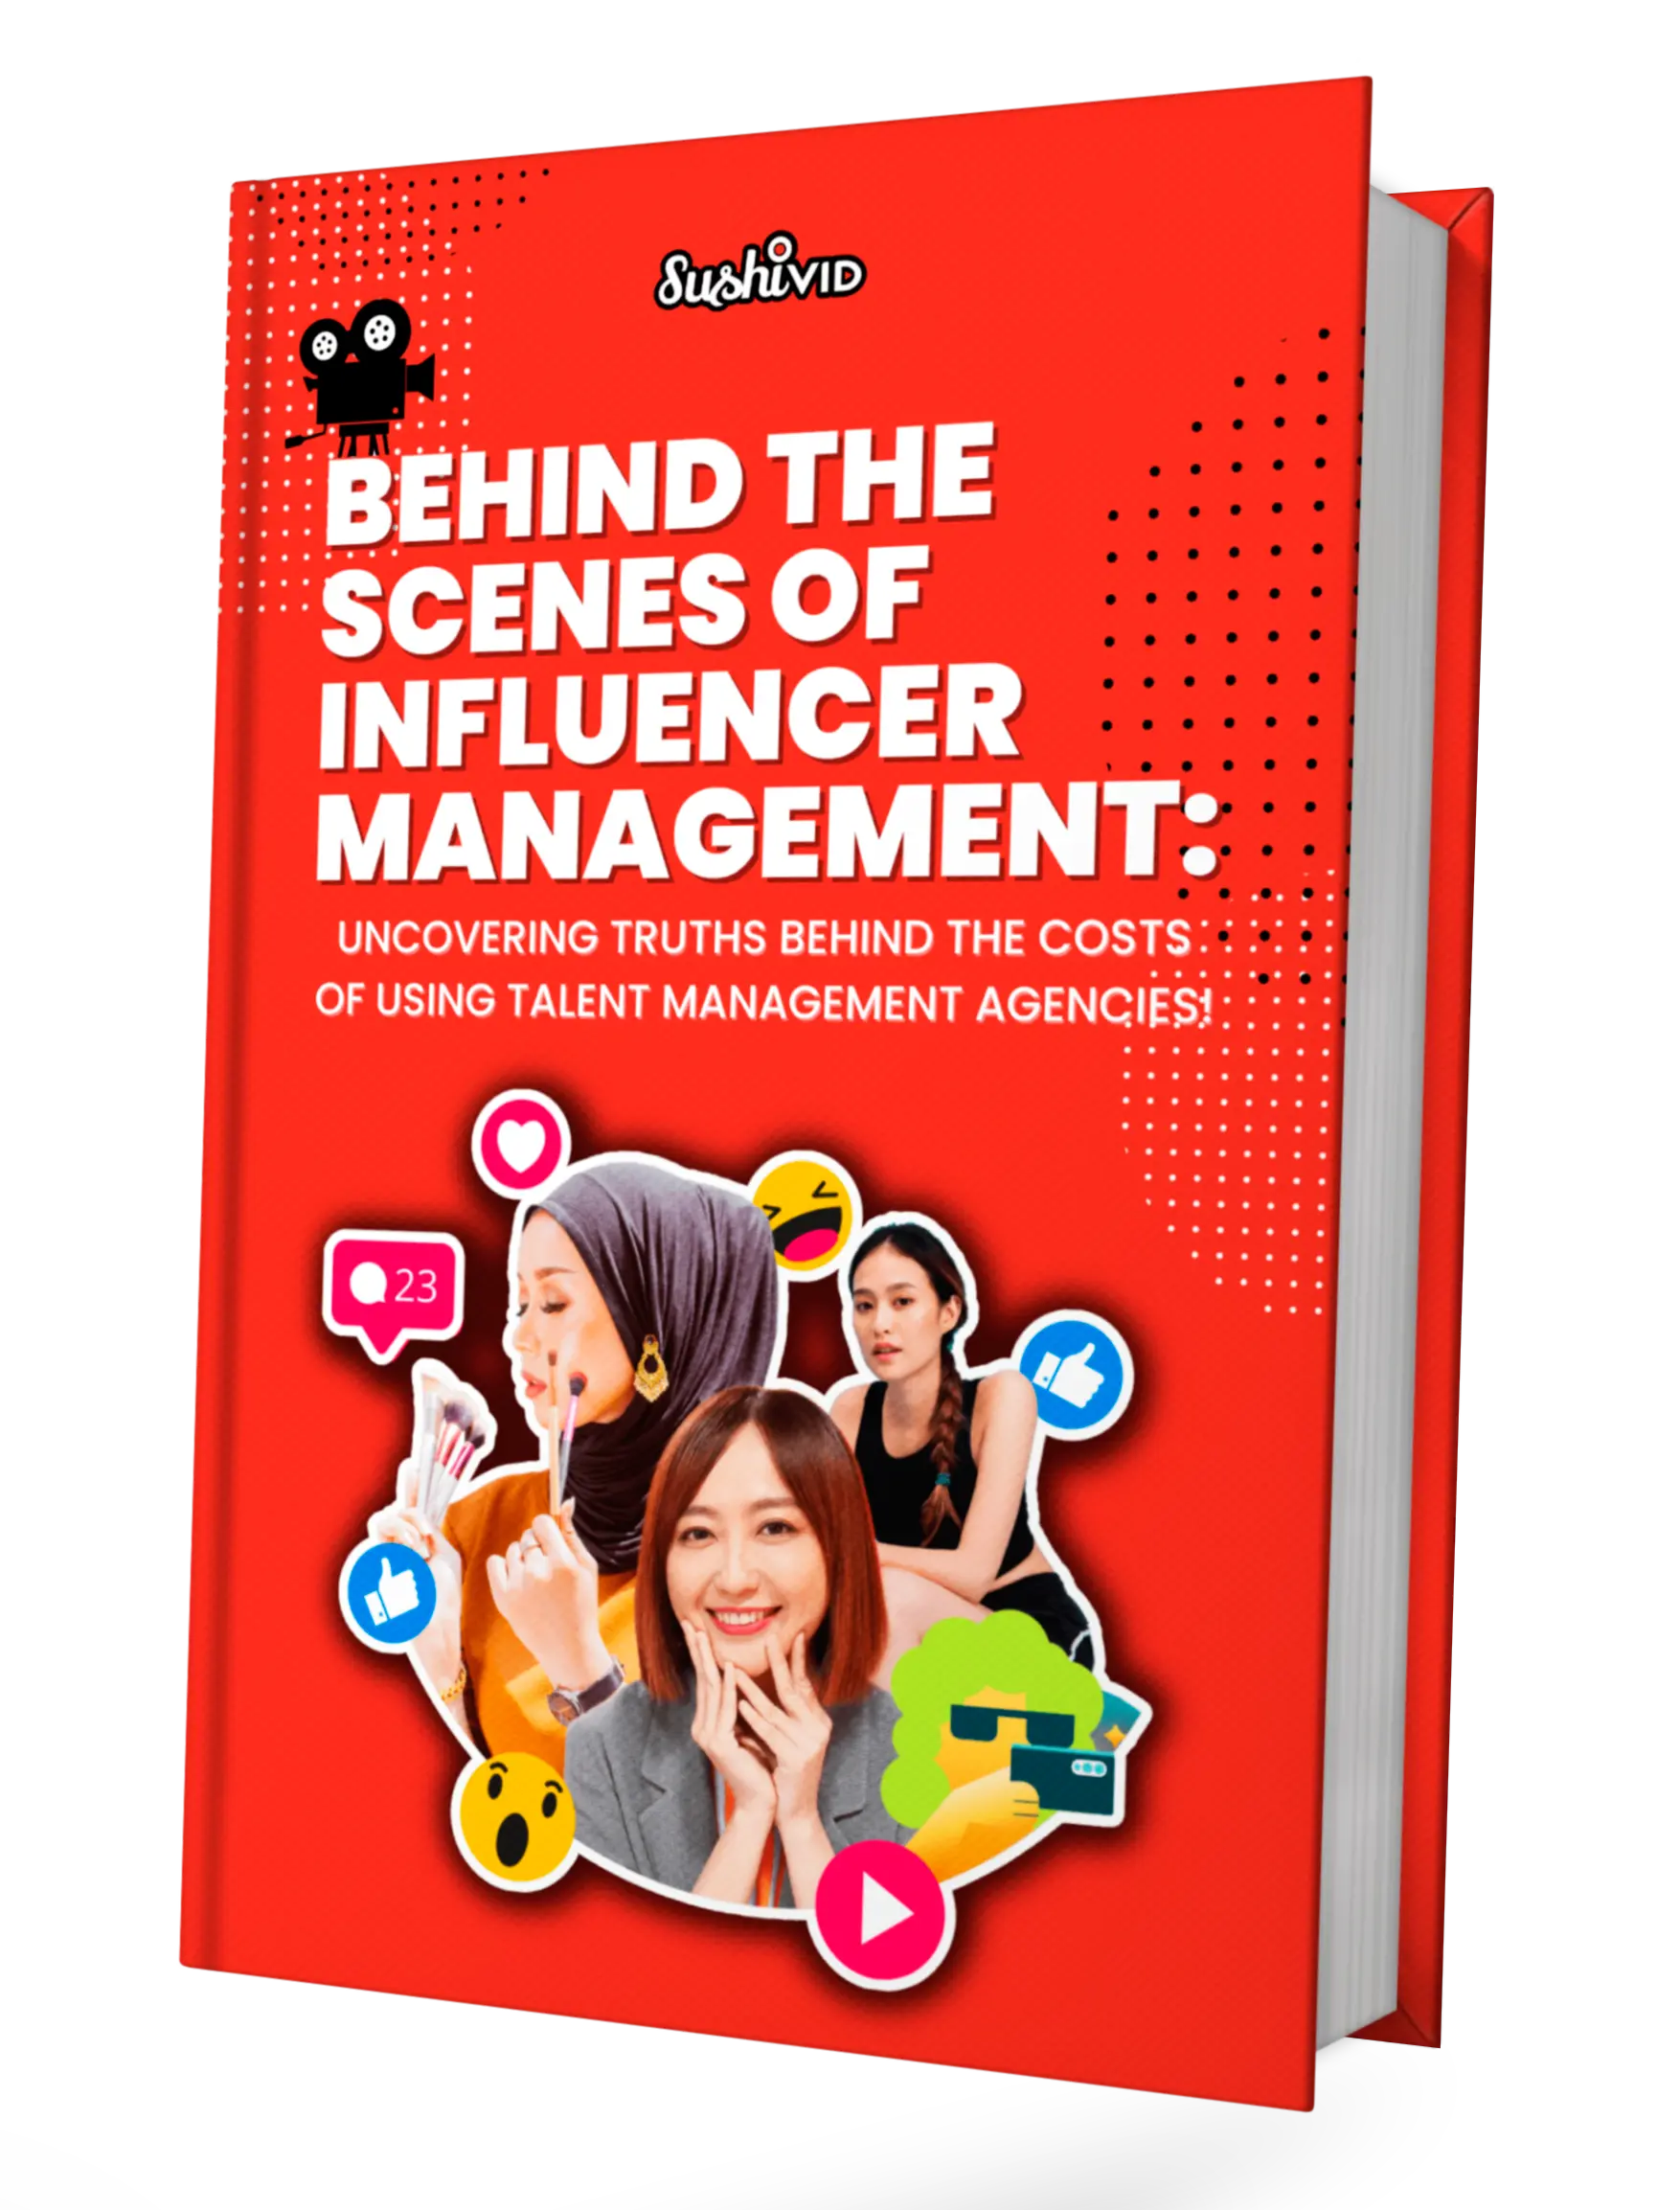 Behind the Scenes of Influencer Management